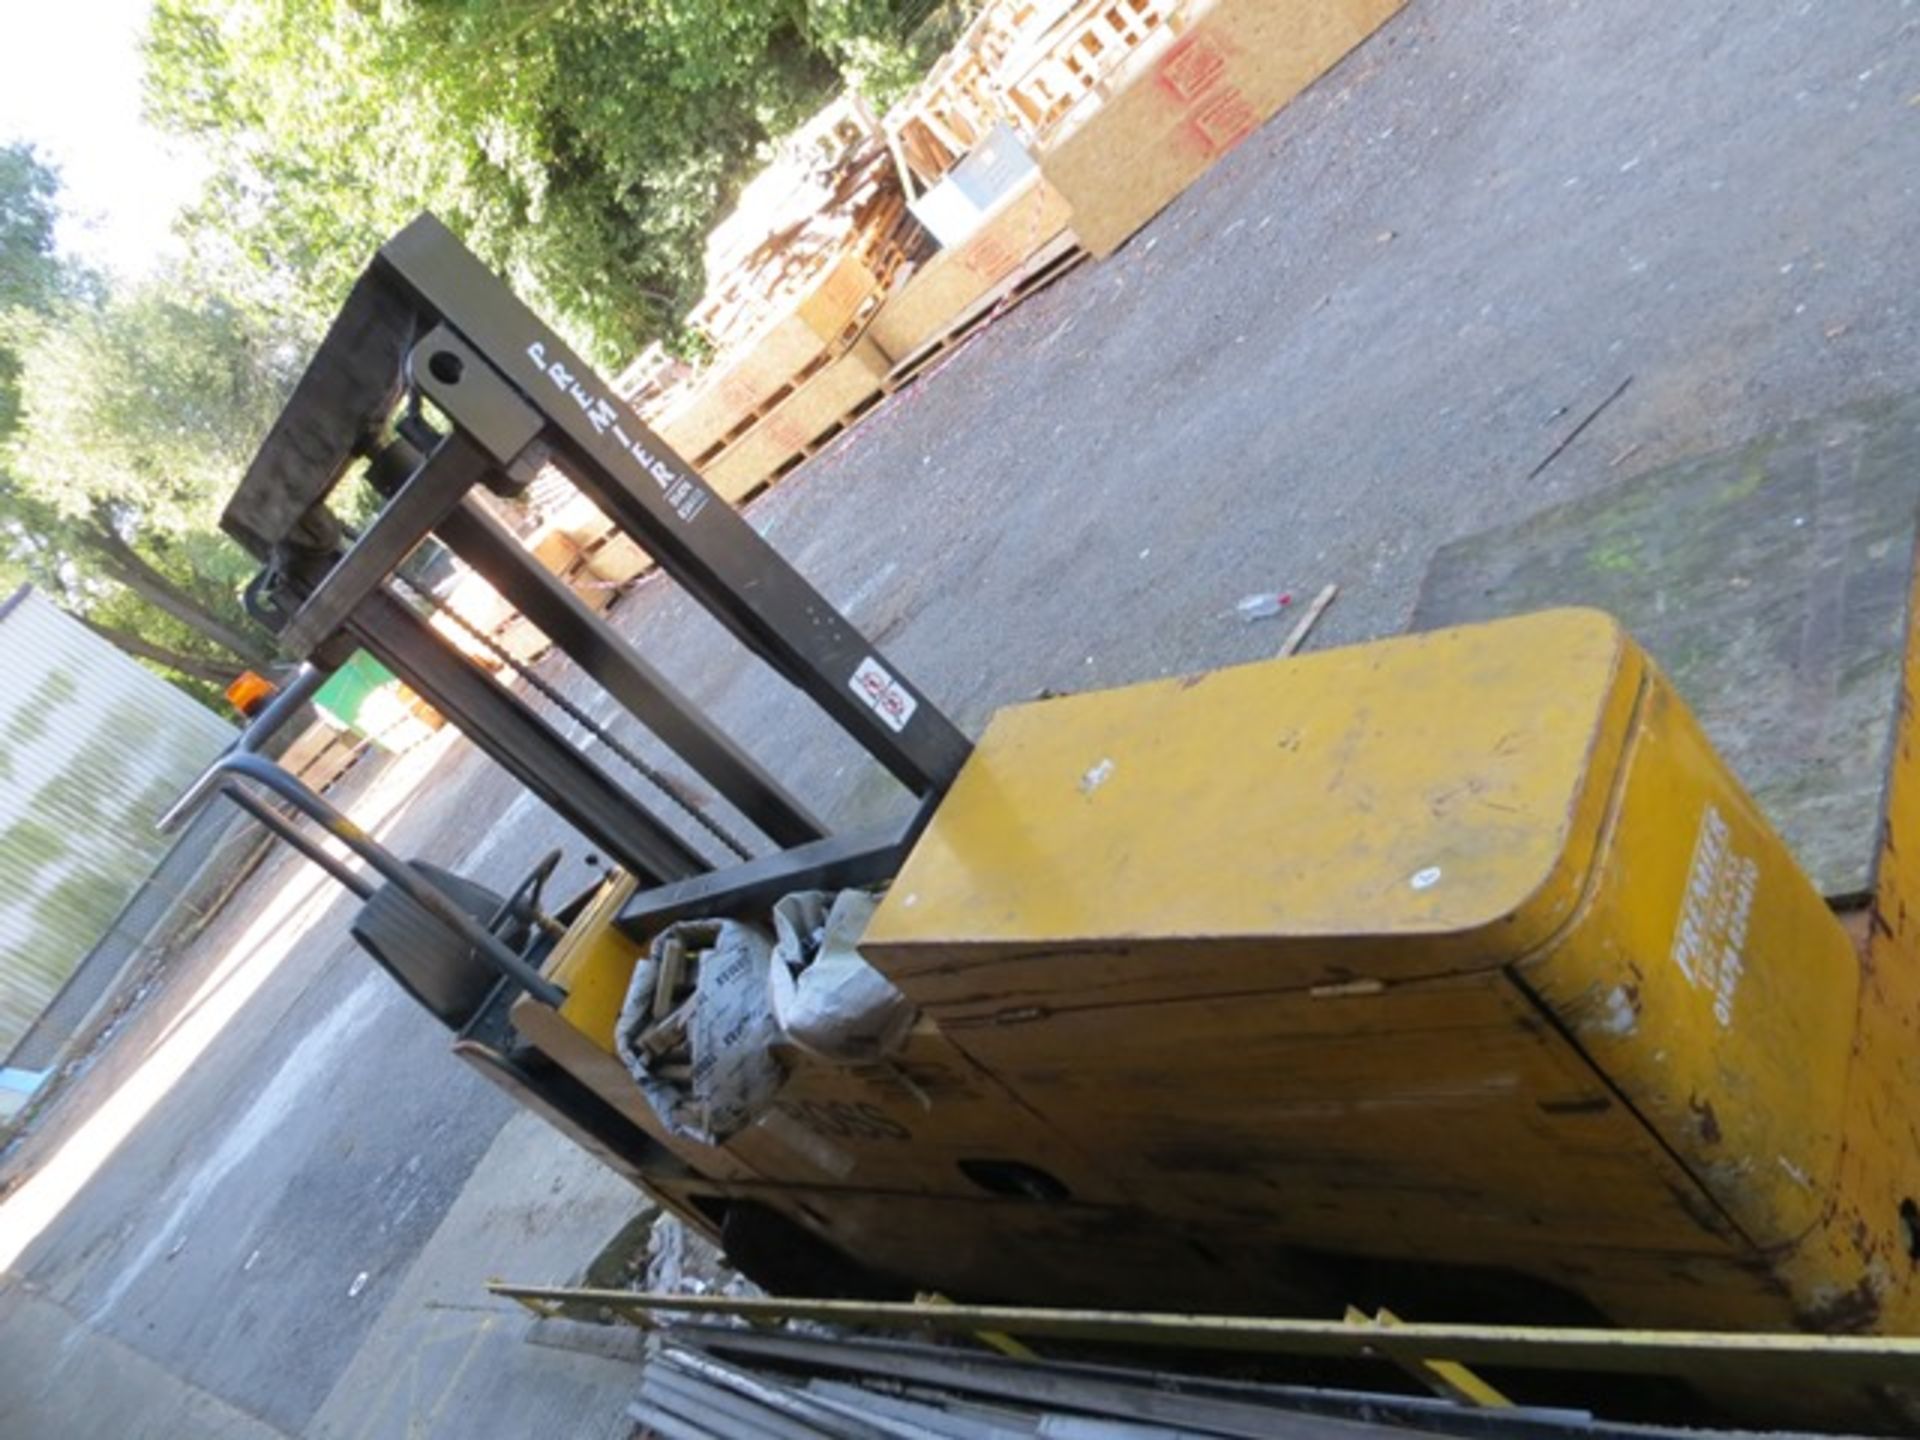 Boss Sideloader Forklift truck suitable for spares and repairs - the purchaser will be required to - Image 5 of 5